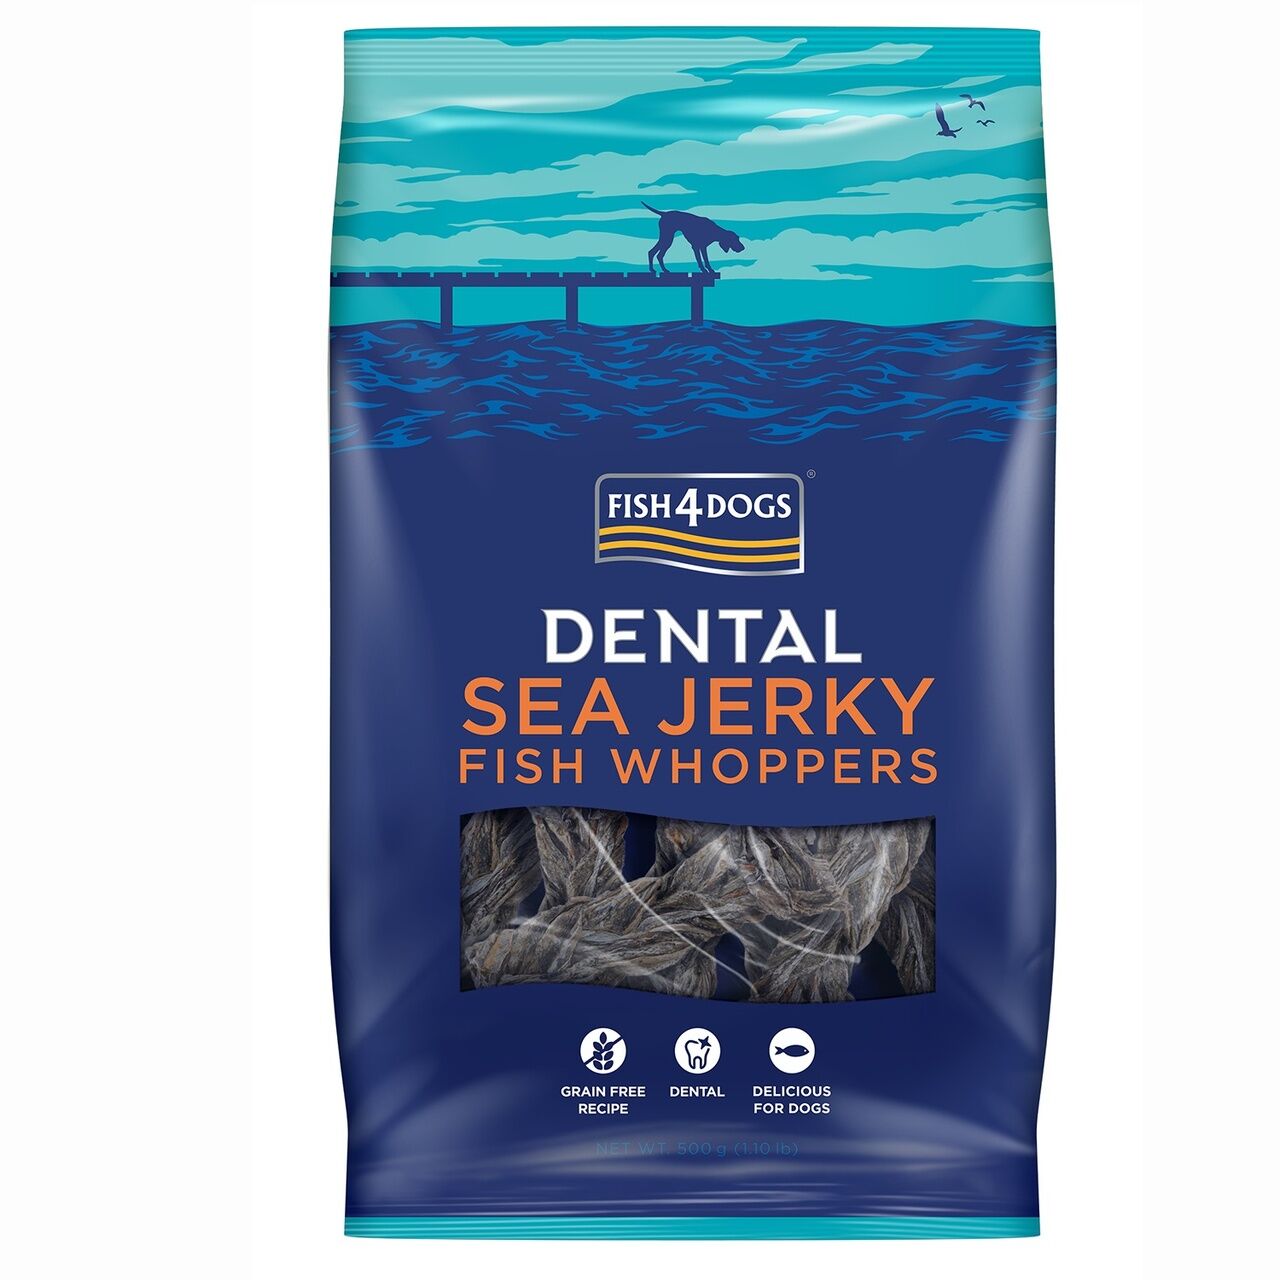 Fish4Dogs-Sea-Jerky-Fish-Whoppers-500g-Front-Easy-Resize-FD-83988